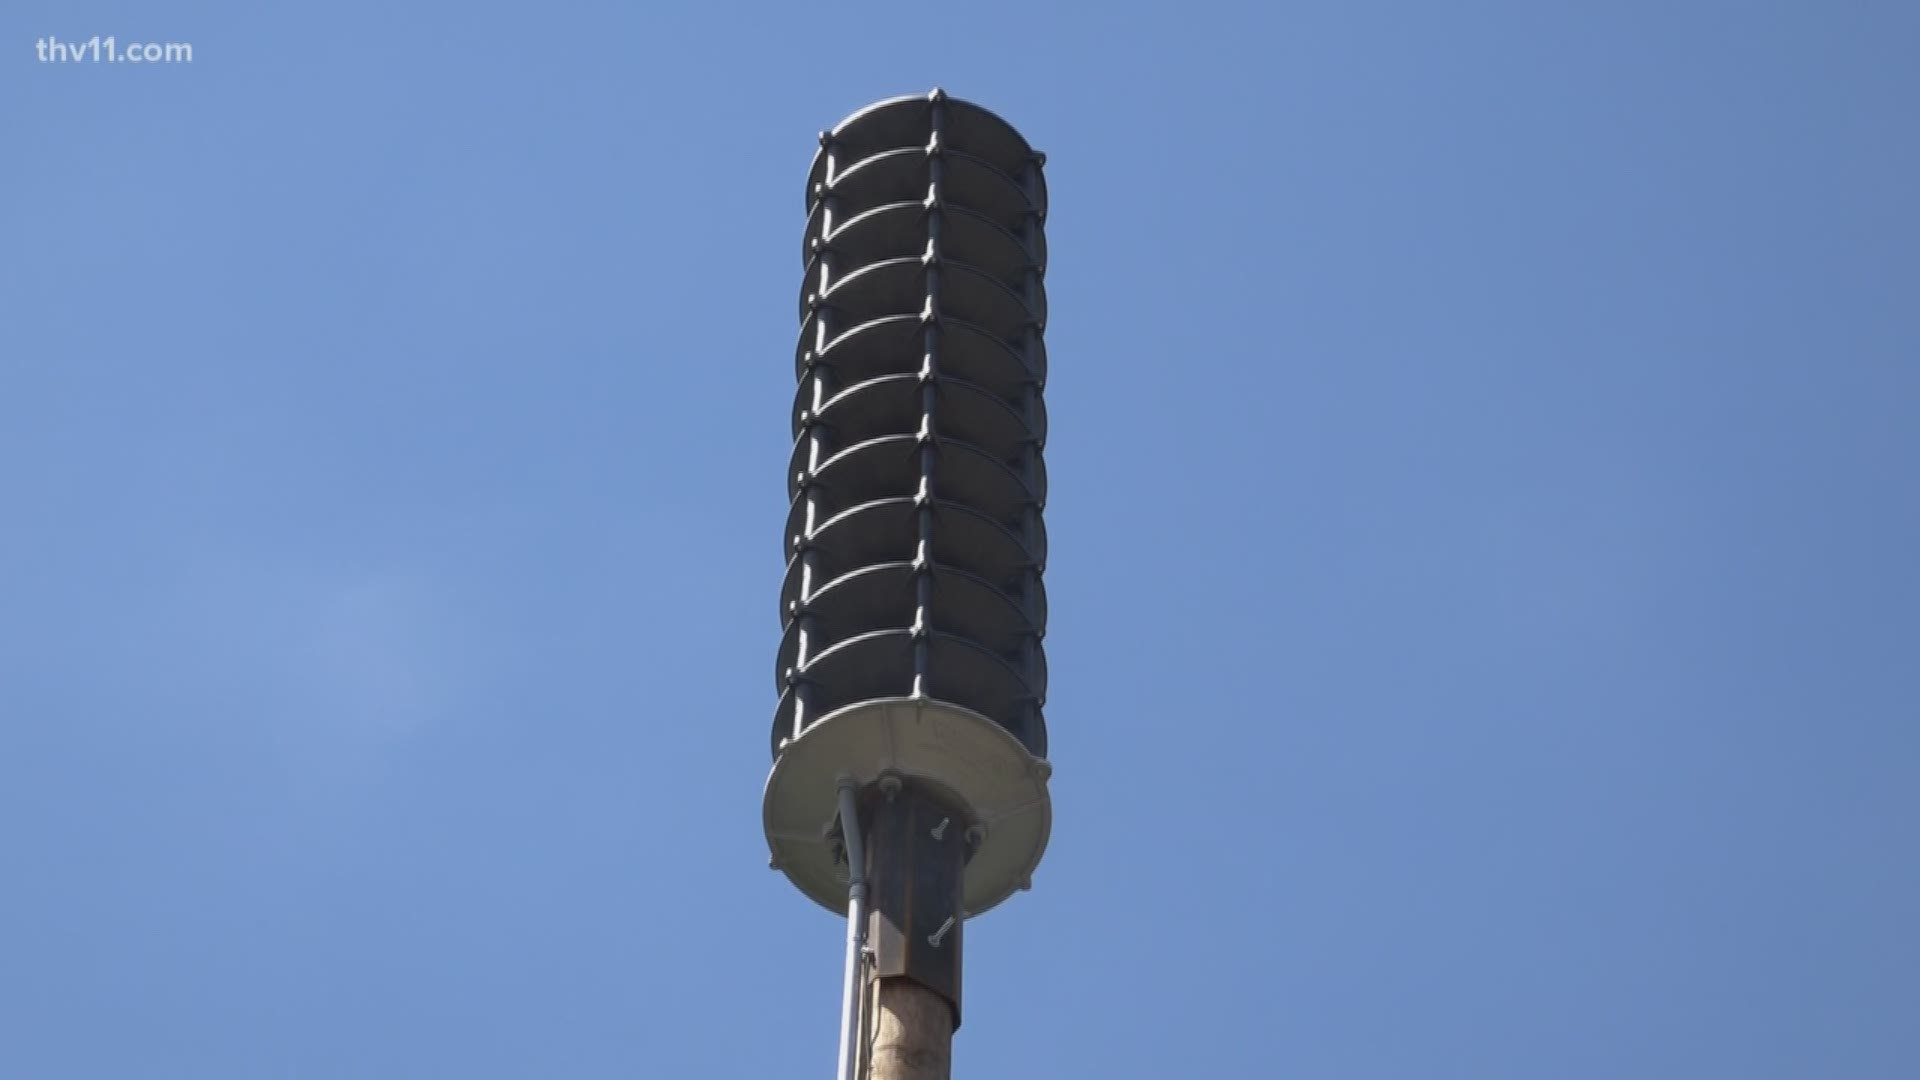 The weekend storms may have rolled out, but concerns over tornado sirens linger.